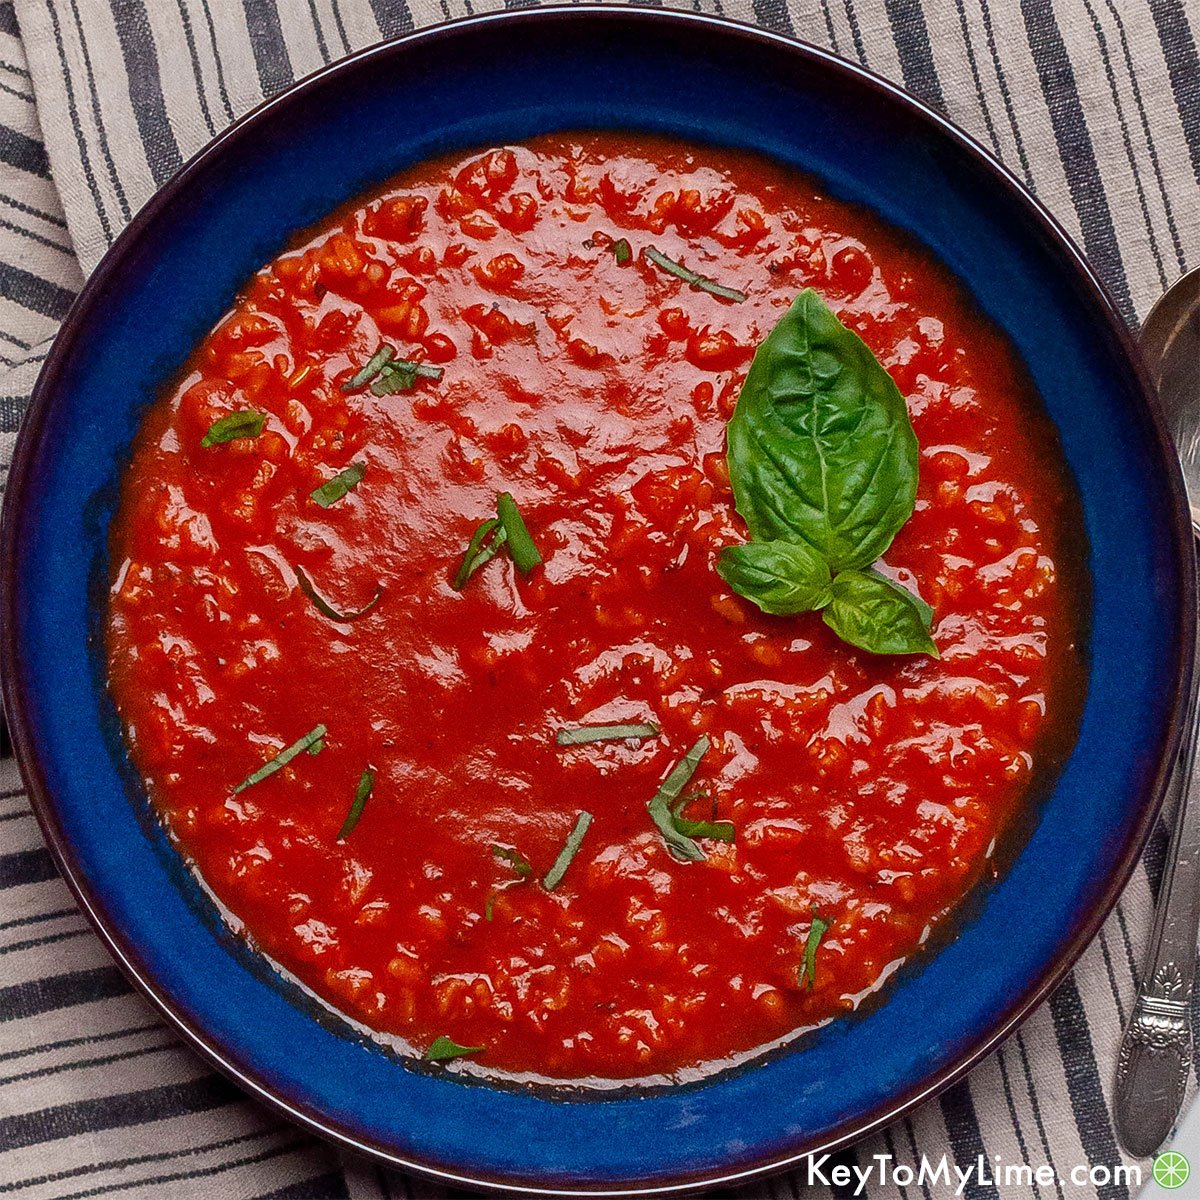 Tomato Chicken Rice Soup Recipe: How to Make It